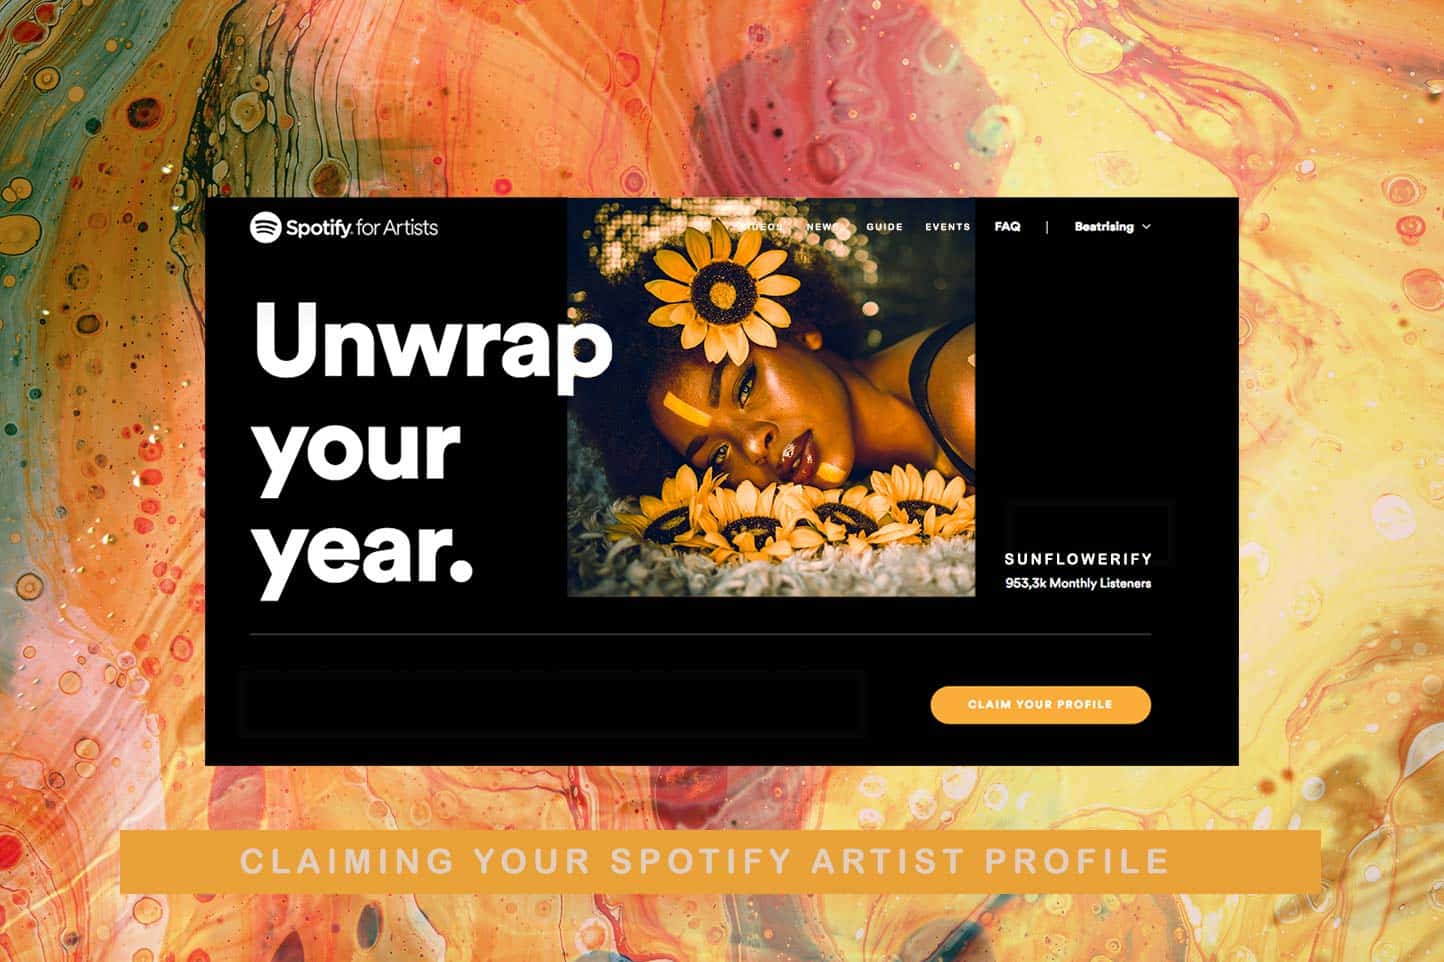 image-with-title-claiming-your-spotify-artist-profile